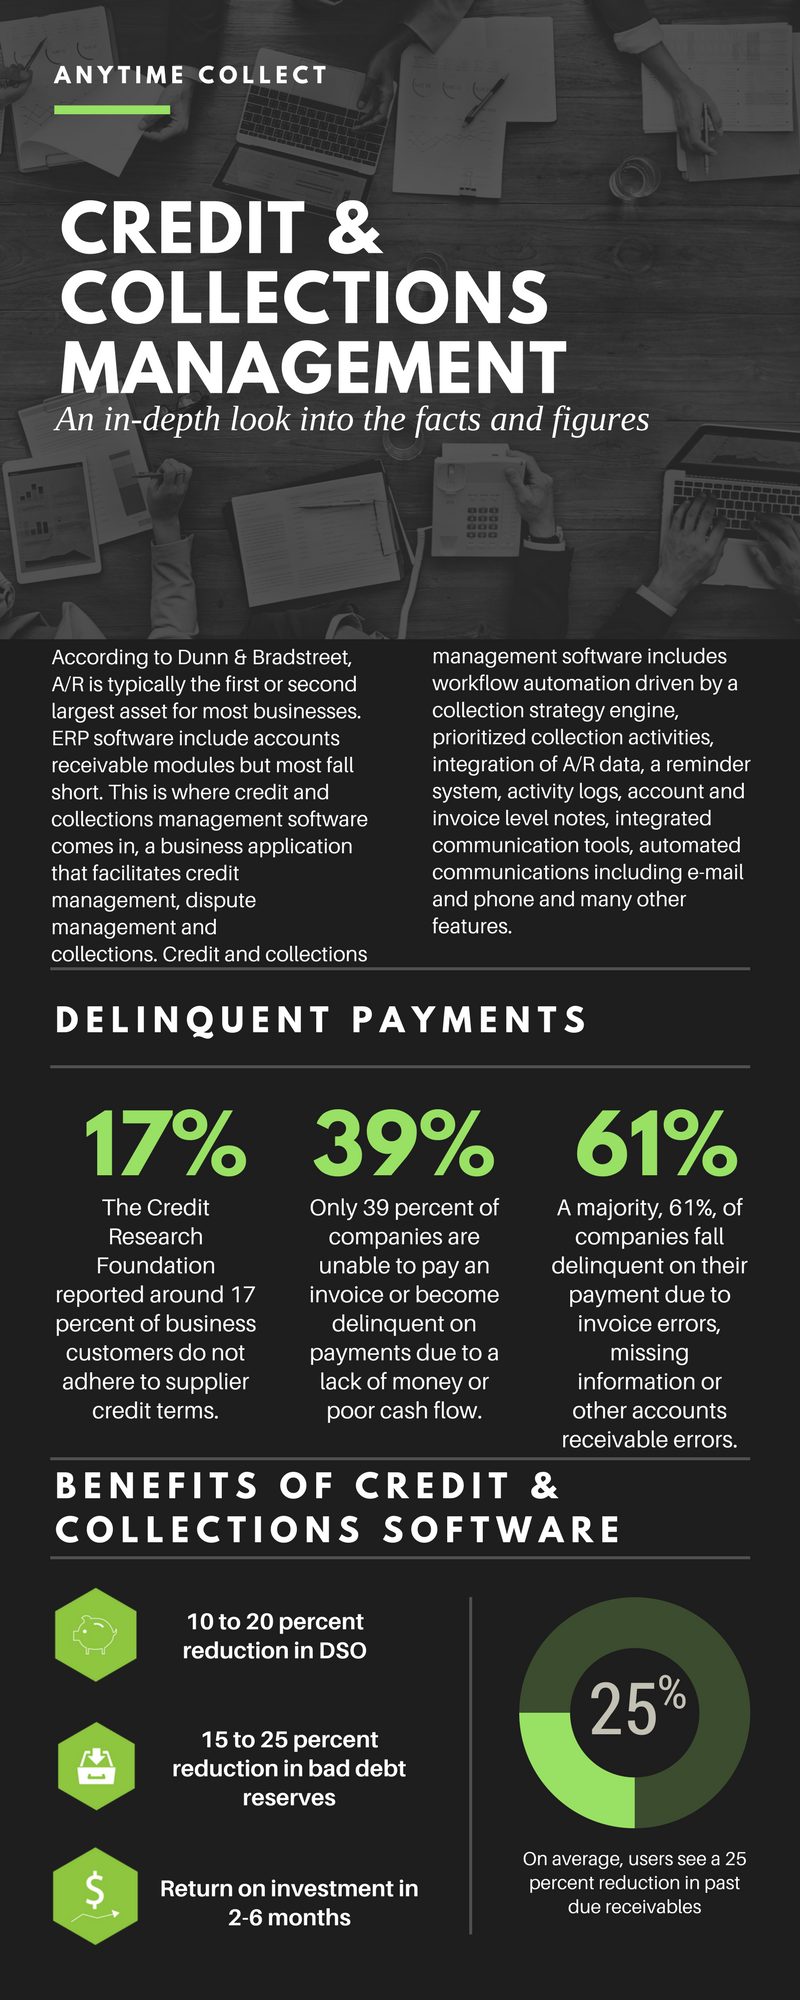 Credit and Collections Management Software Infographic